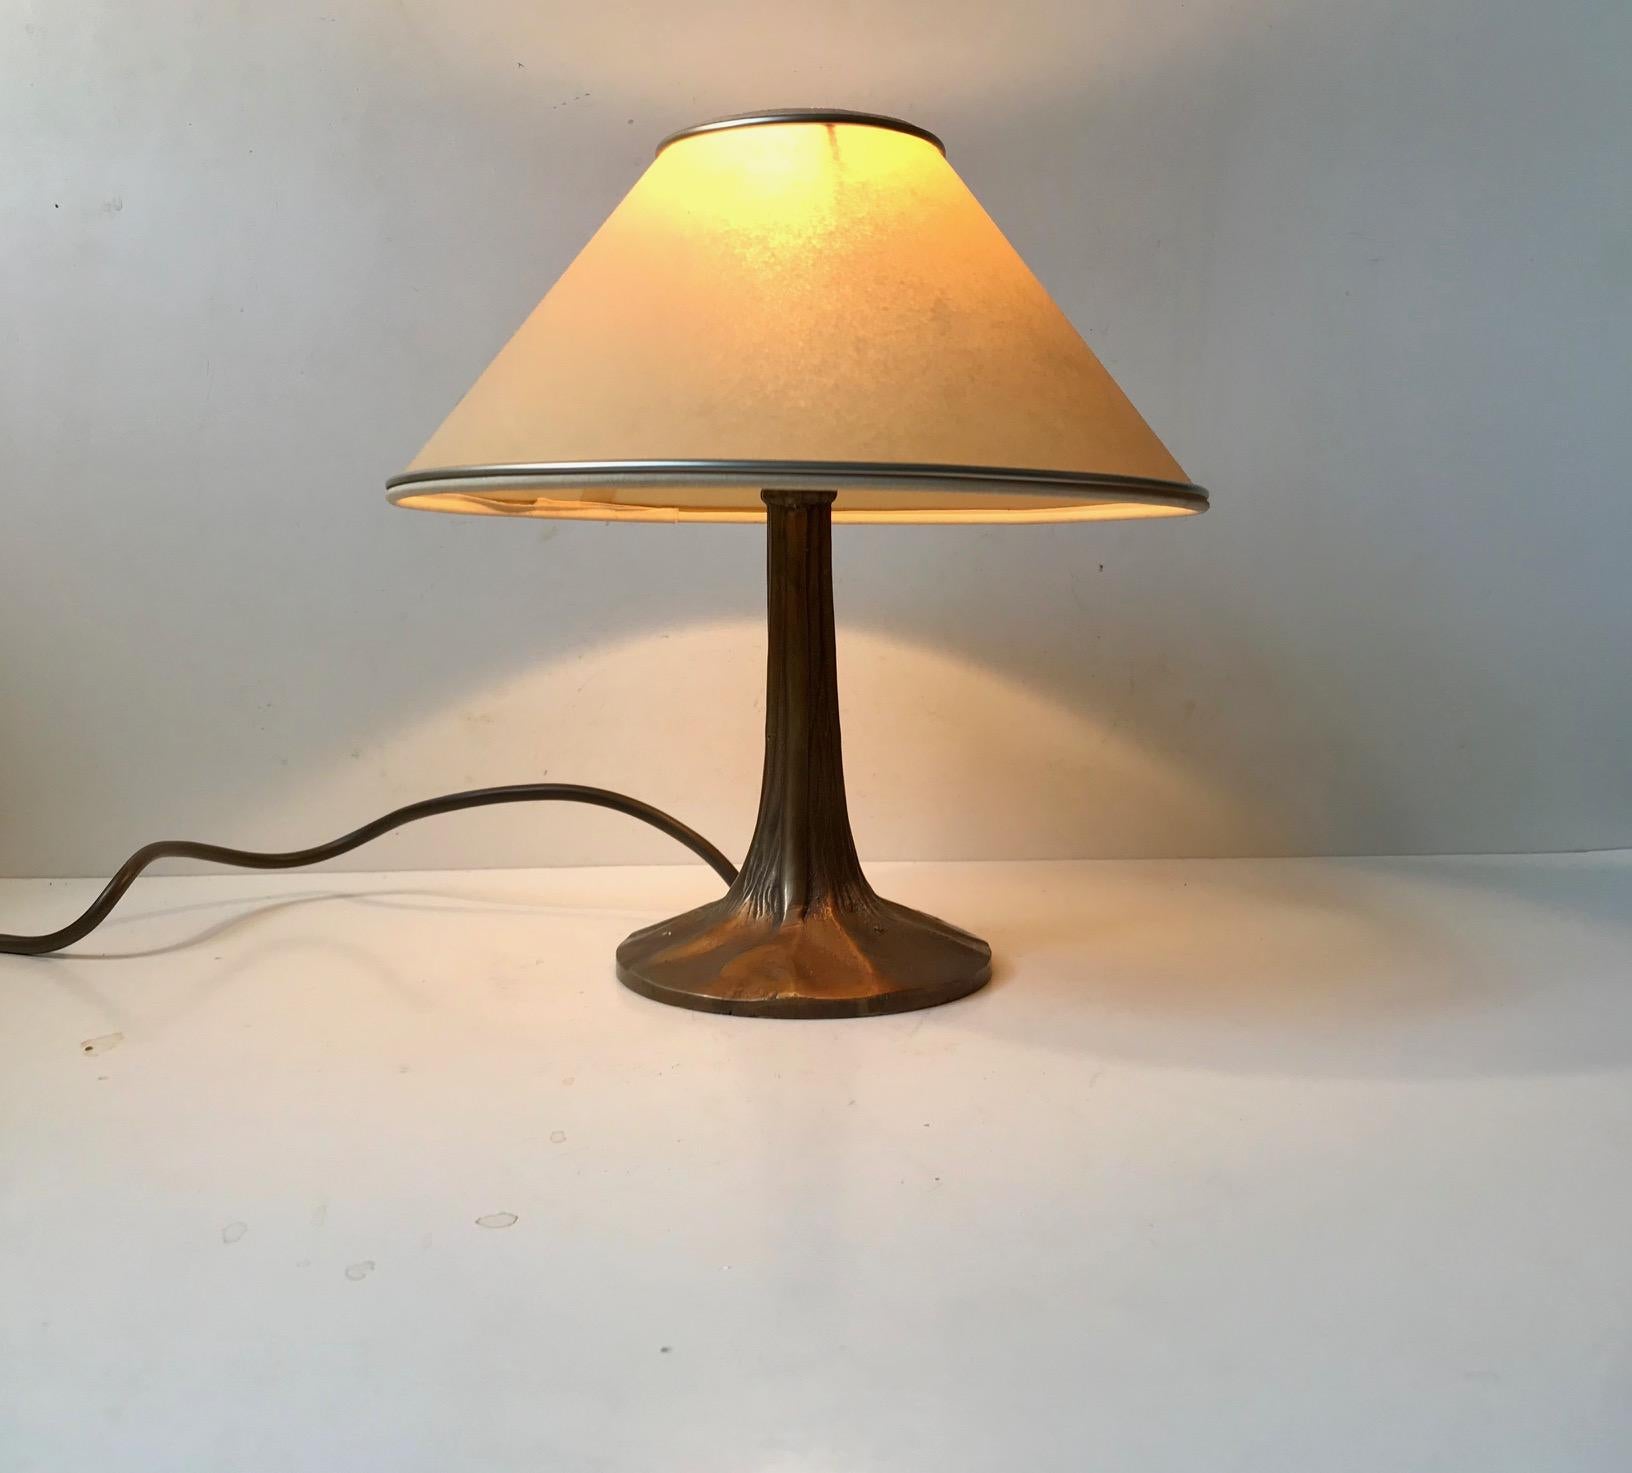 Small unusual French table lamp with tree trunk shaped base in bronze. It was made during the 1940s or 1950s and it has a vintage textile shade that matches.